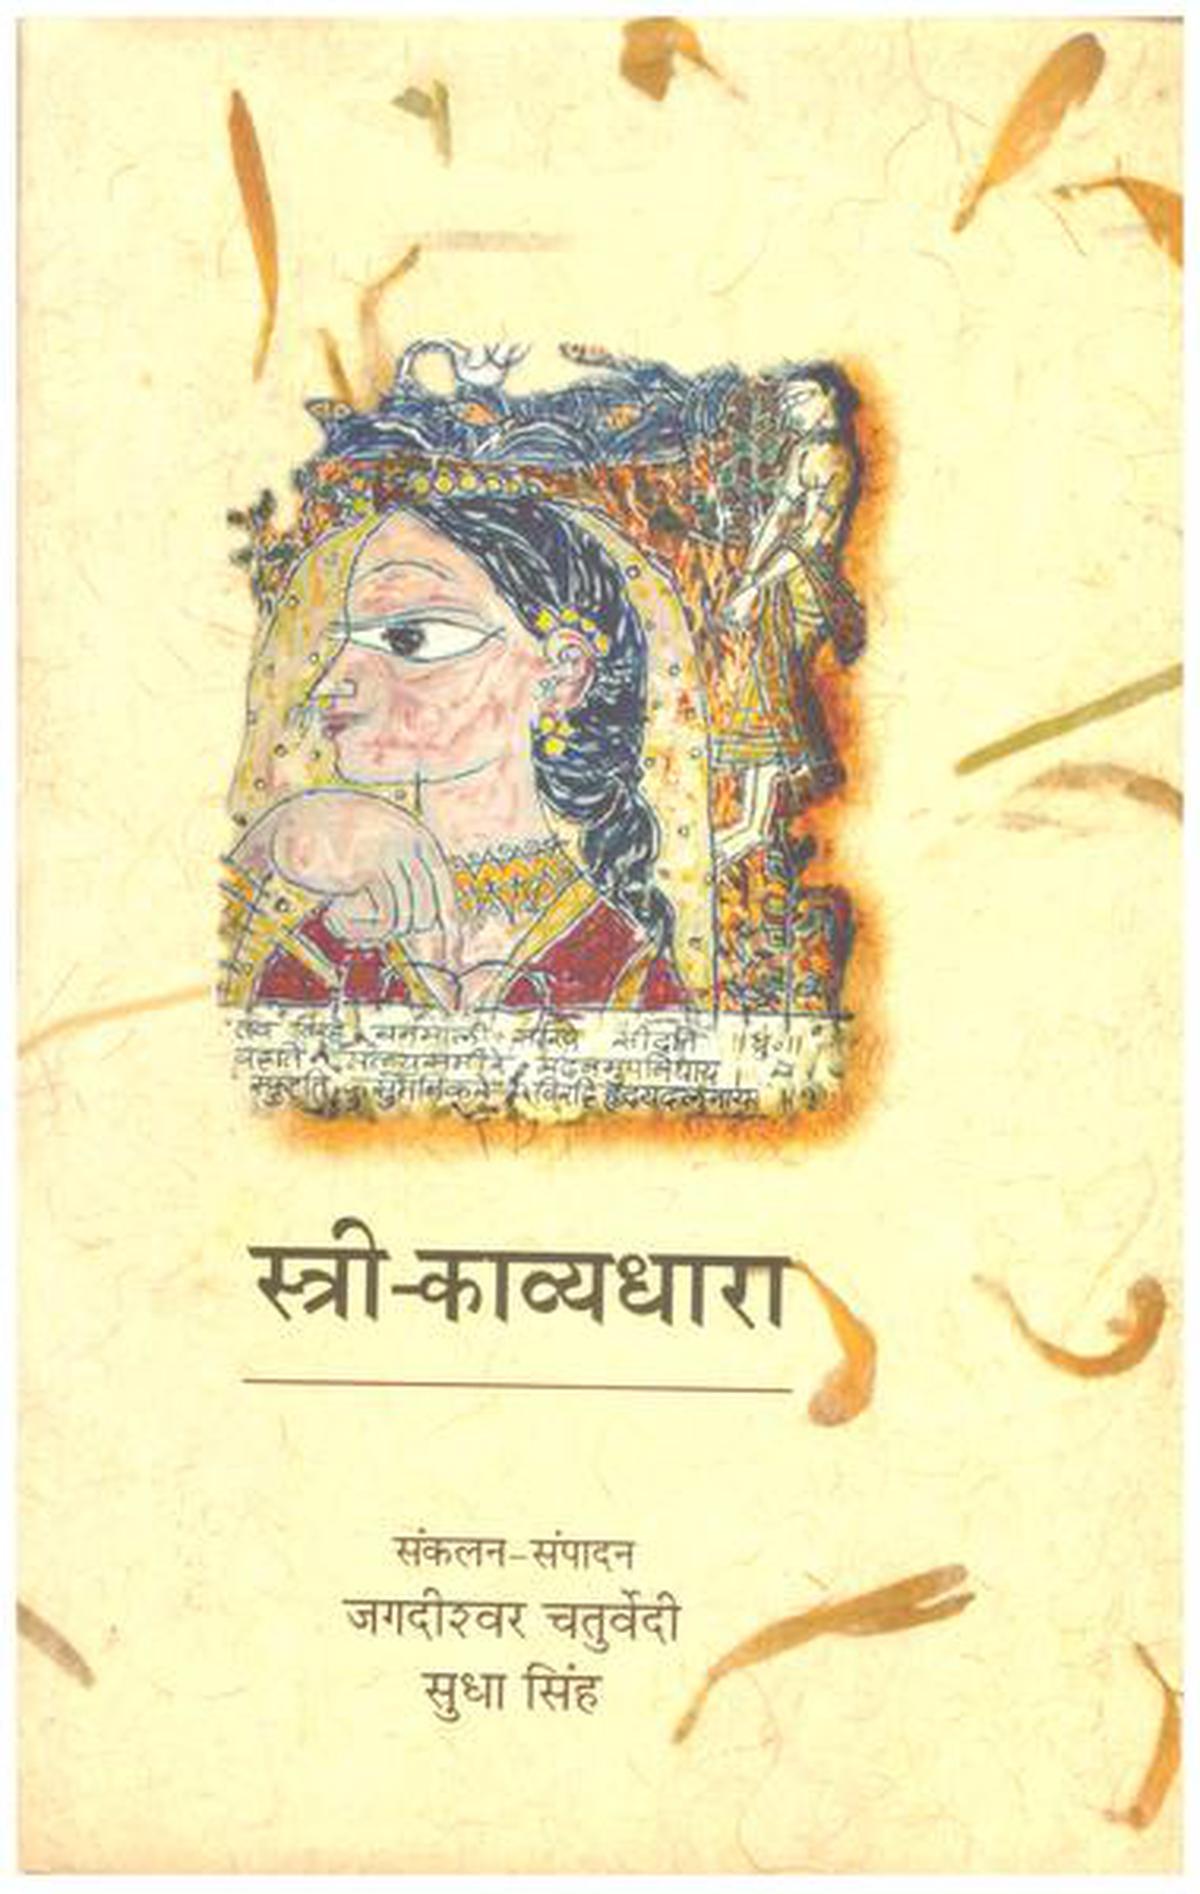 ‘Stree Kavyadhara’ (Stream of Women’s Poetry), 2006, by Jagadishwar Chaturvedi and Sudha Singh is a treasure trove of women’s poetry written between 1388 and 1950.